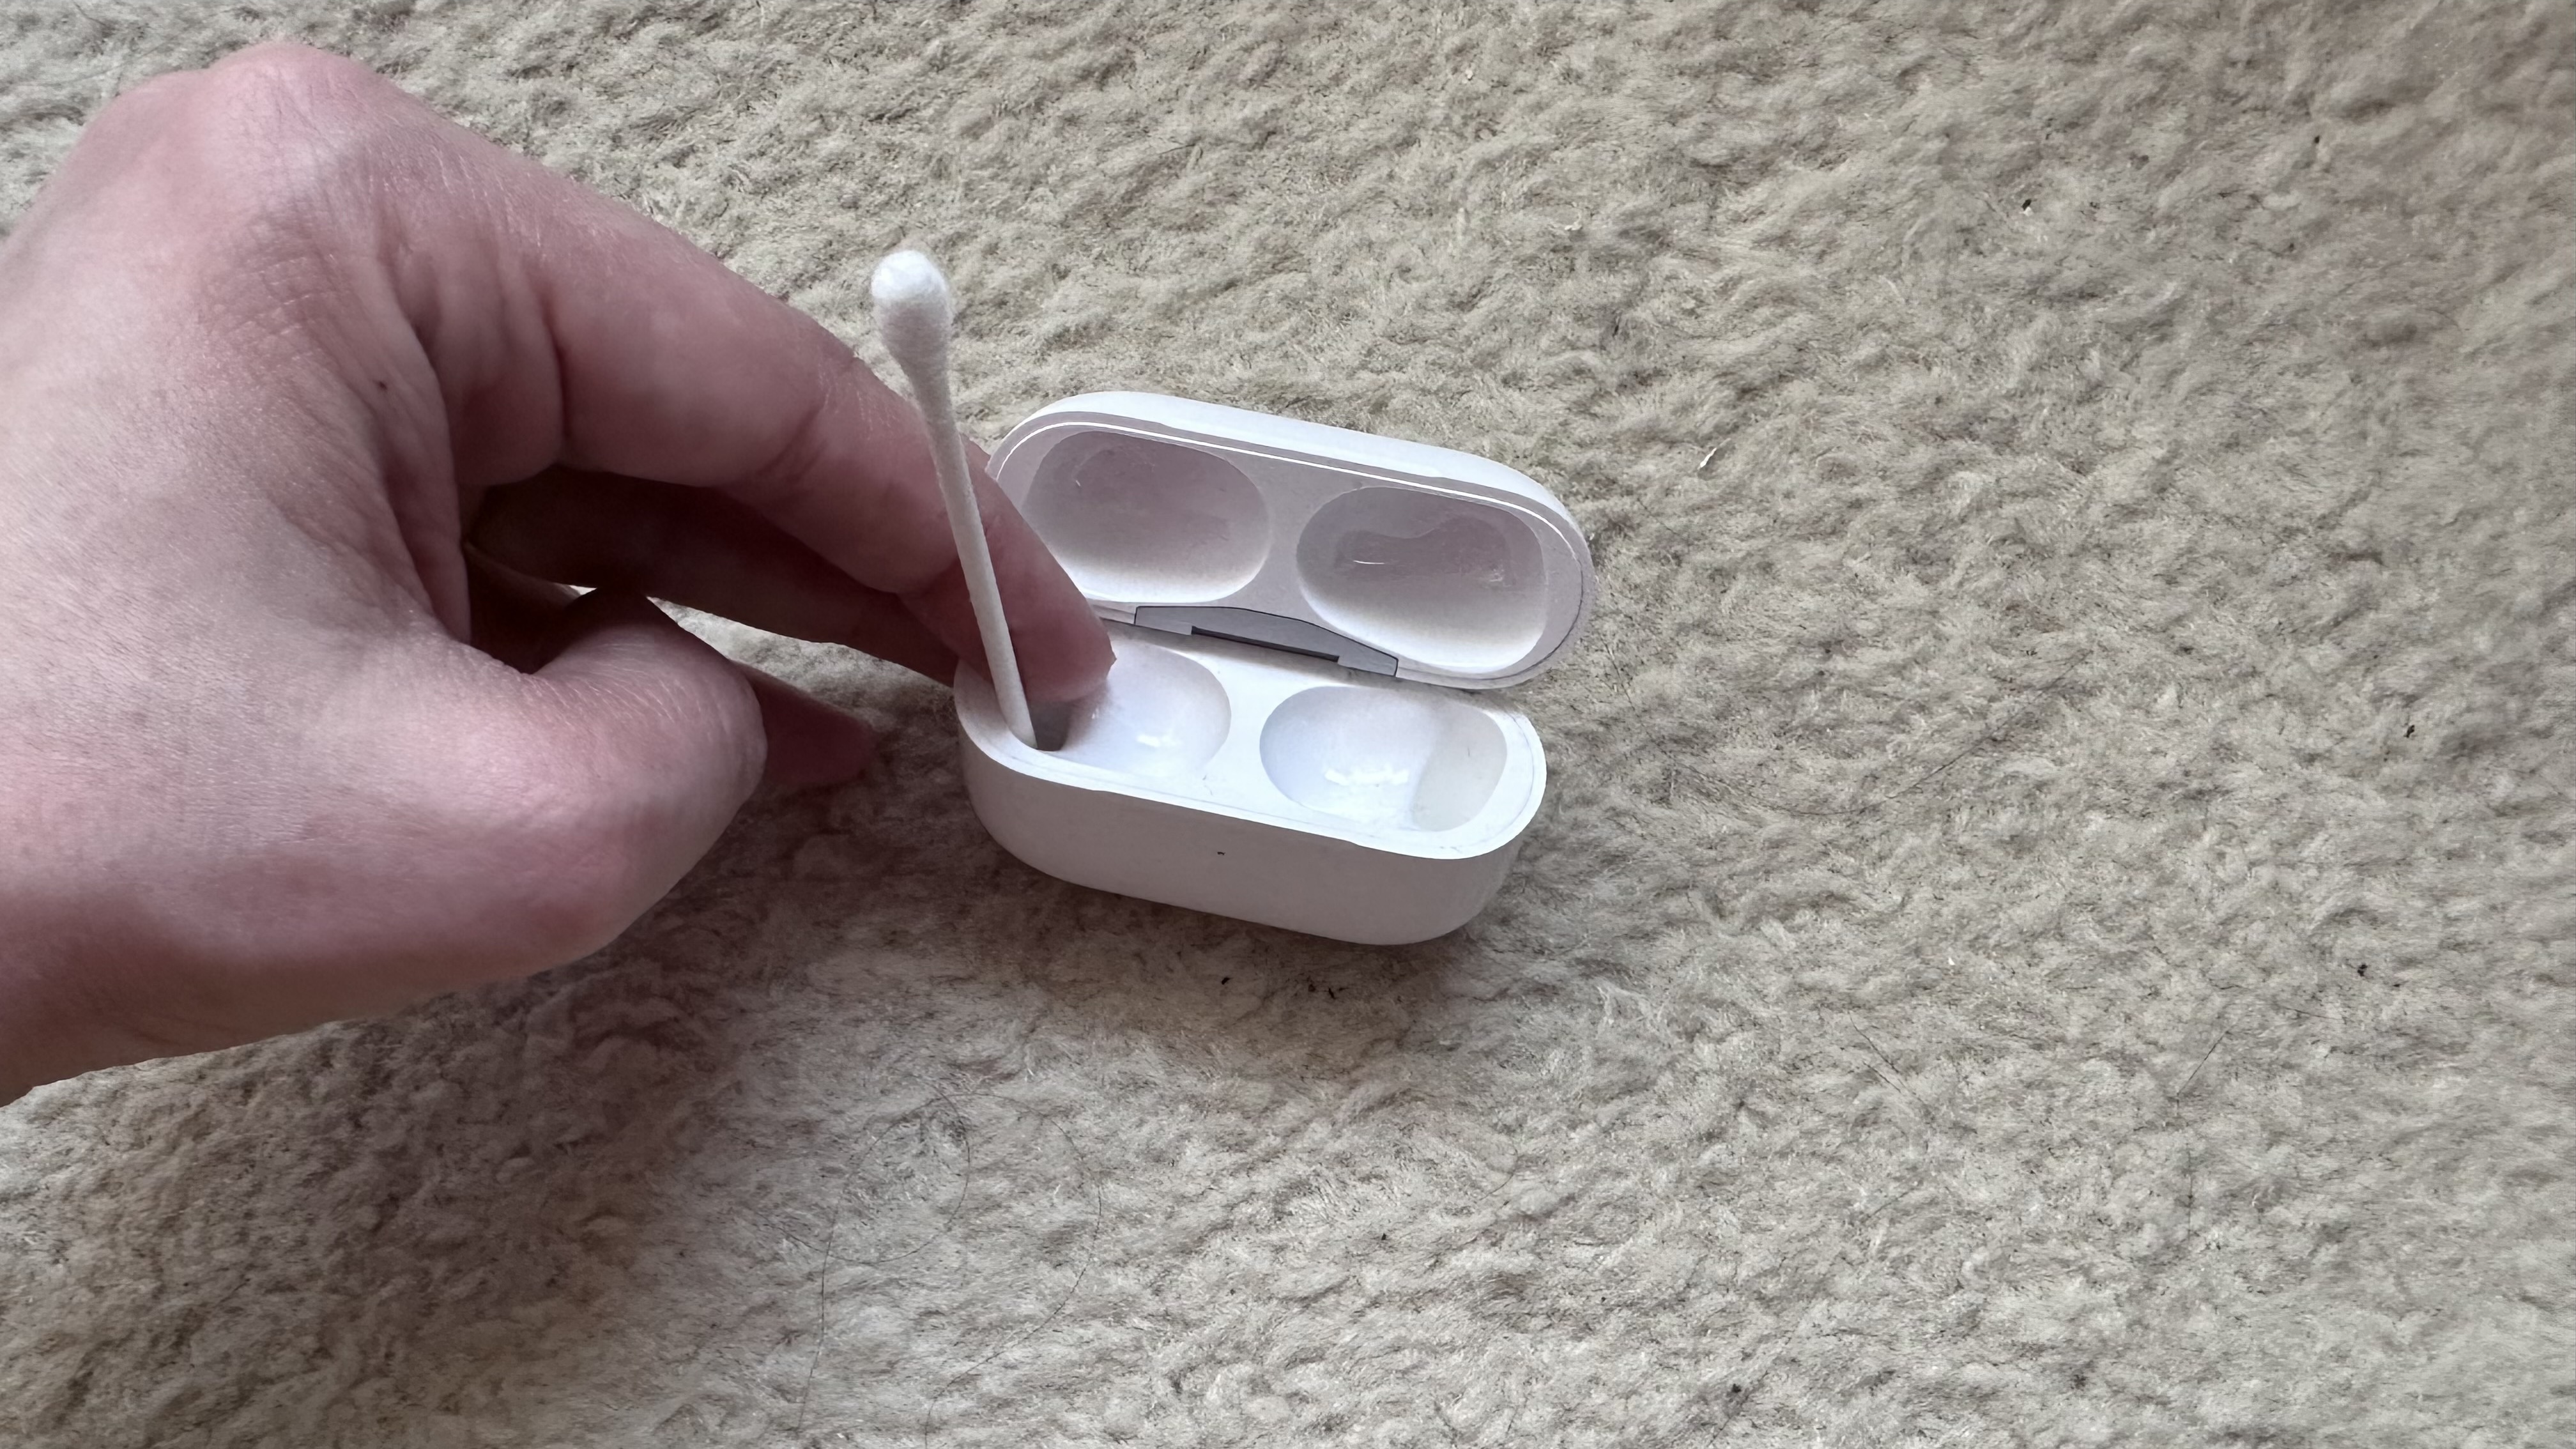 An Apple AirPods case with a cotton bud sticking out of it.